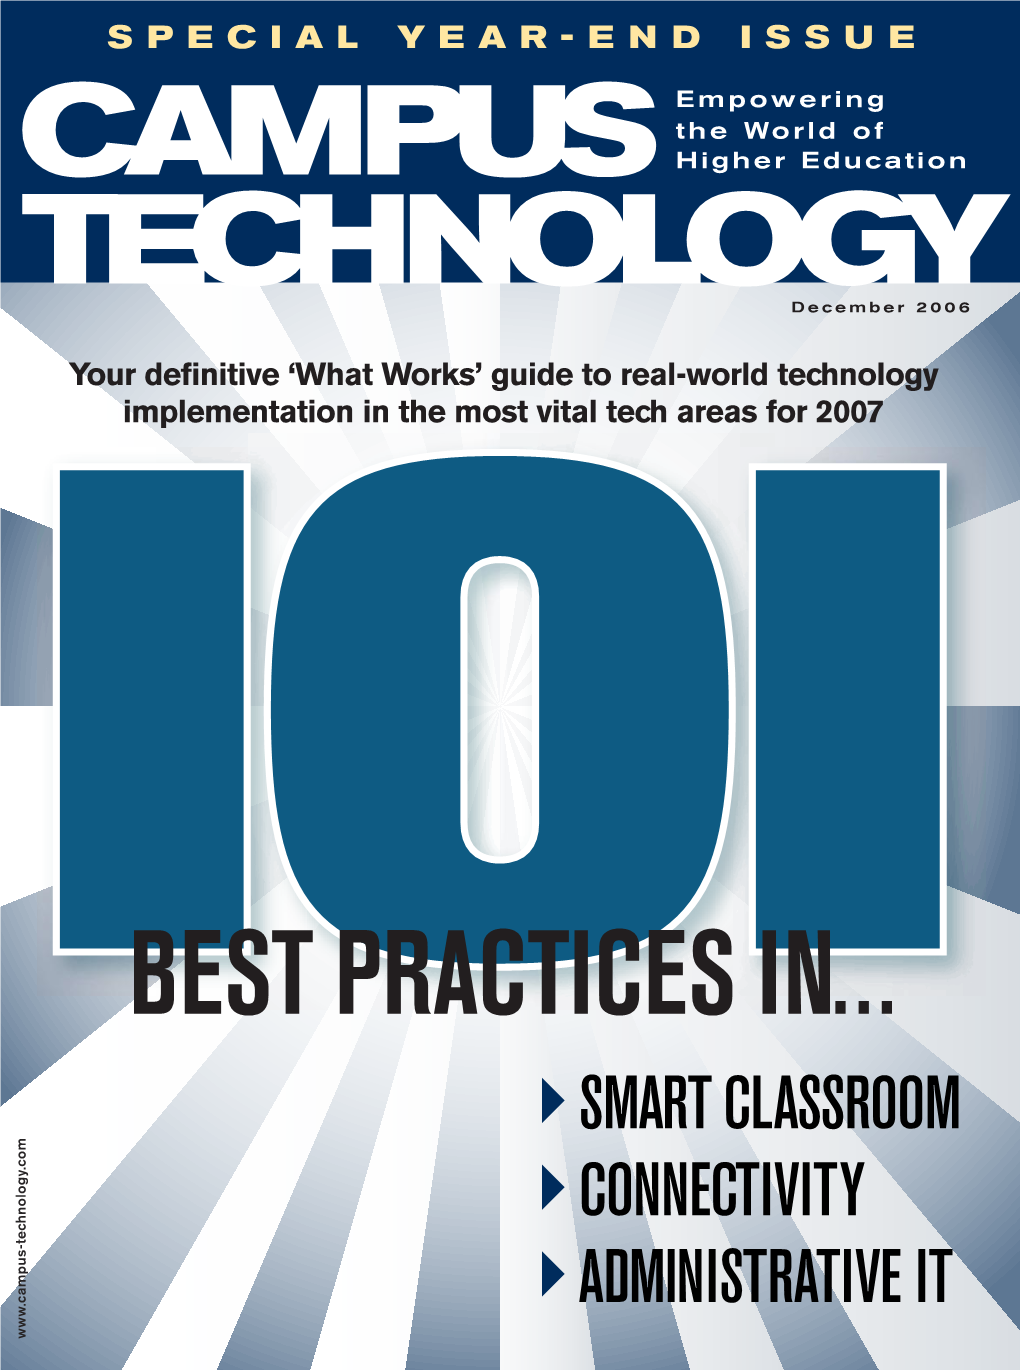 BEST PRACTICES IN... �SMART CLASSROOM �CONNECTIVITY �ADMINISTRATIVE IT Project3 11/13/06 3:30 PM Page 1